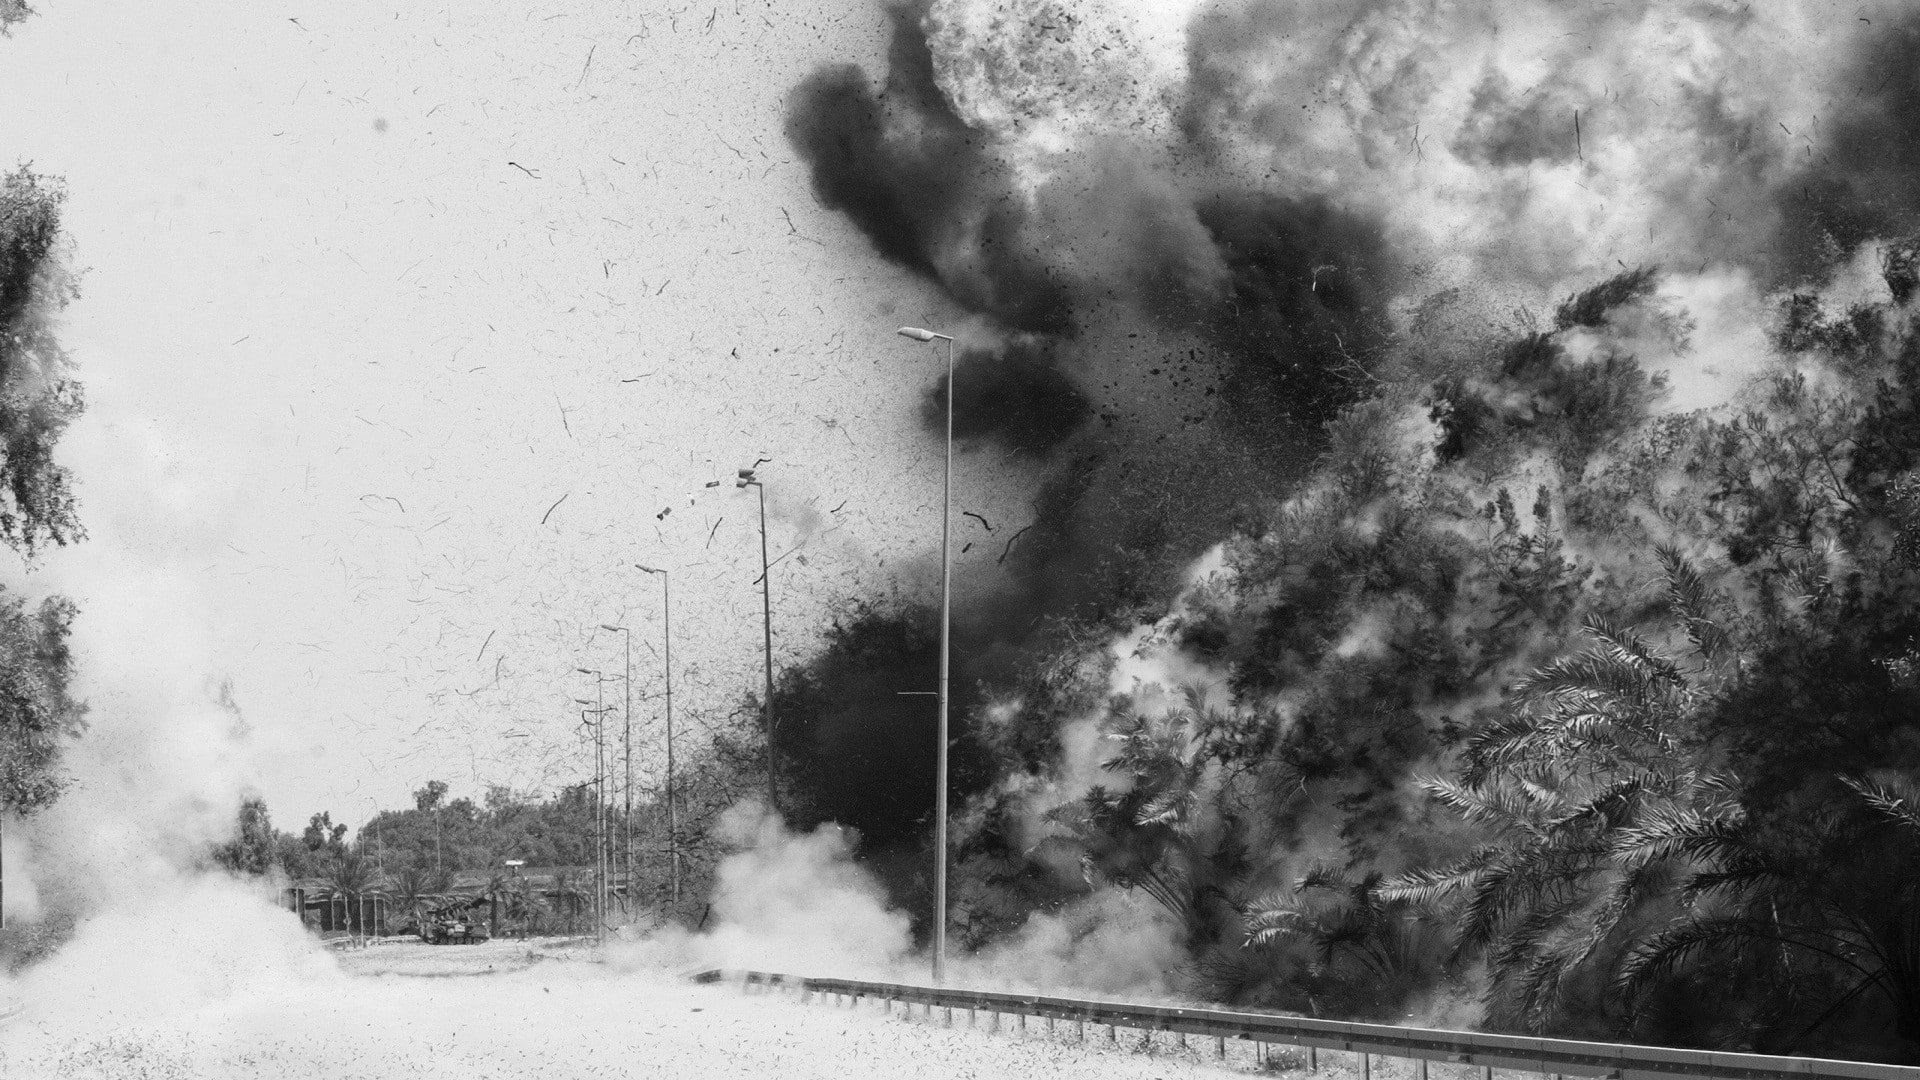 Explosion, military, Napalm, Vietnam War, smoke - physical structure